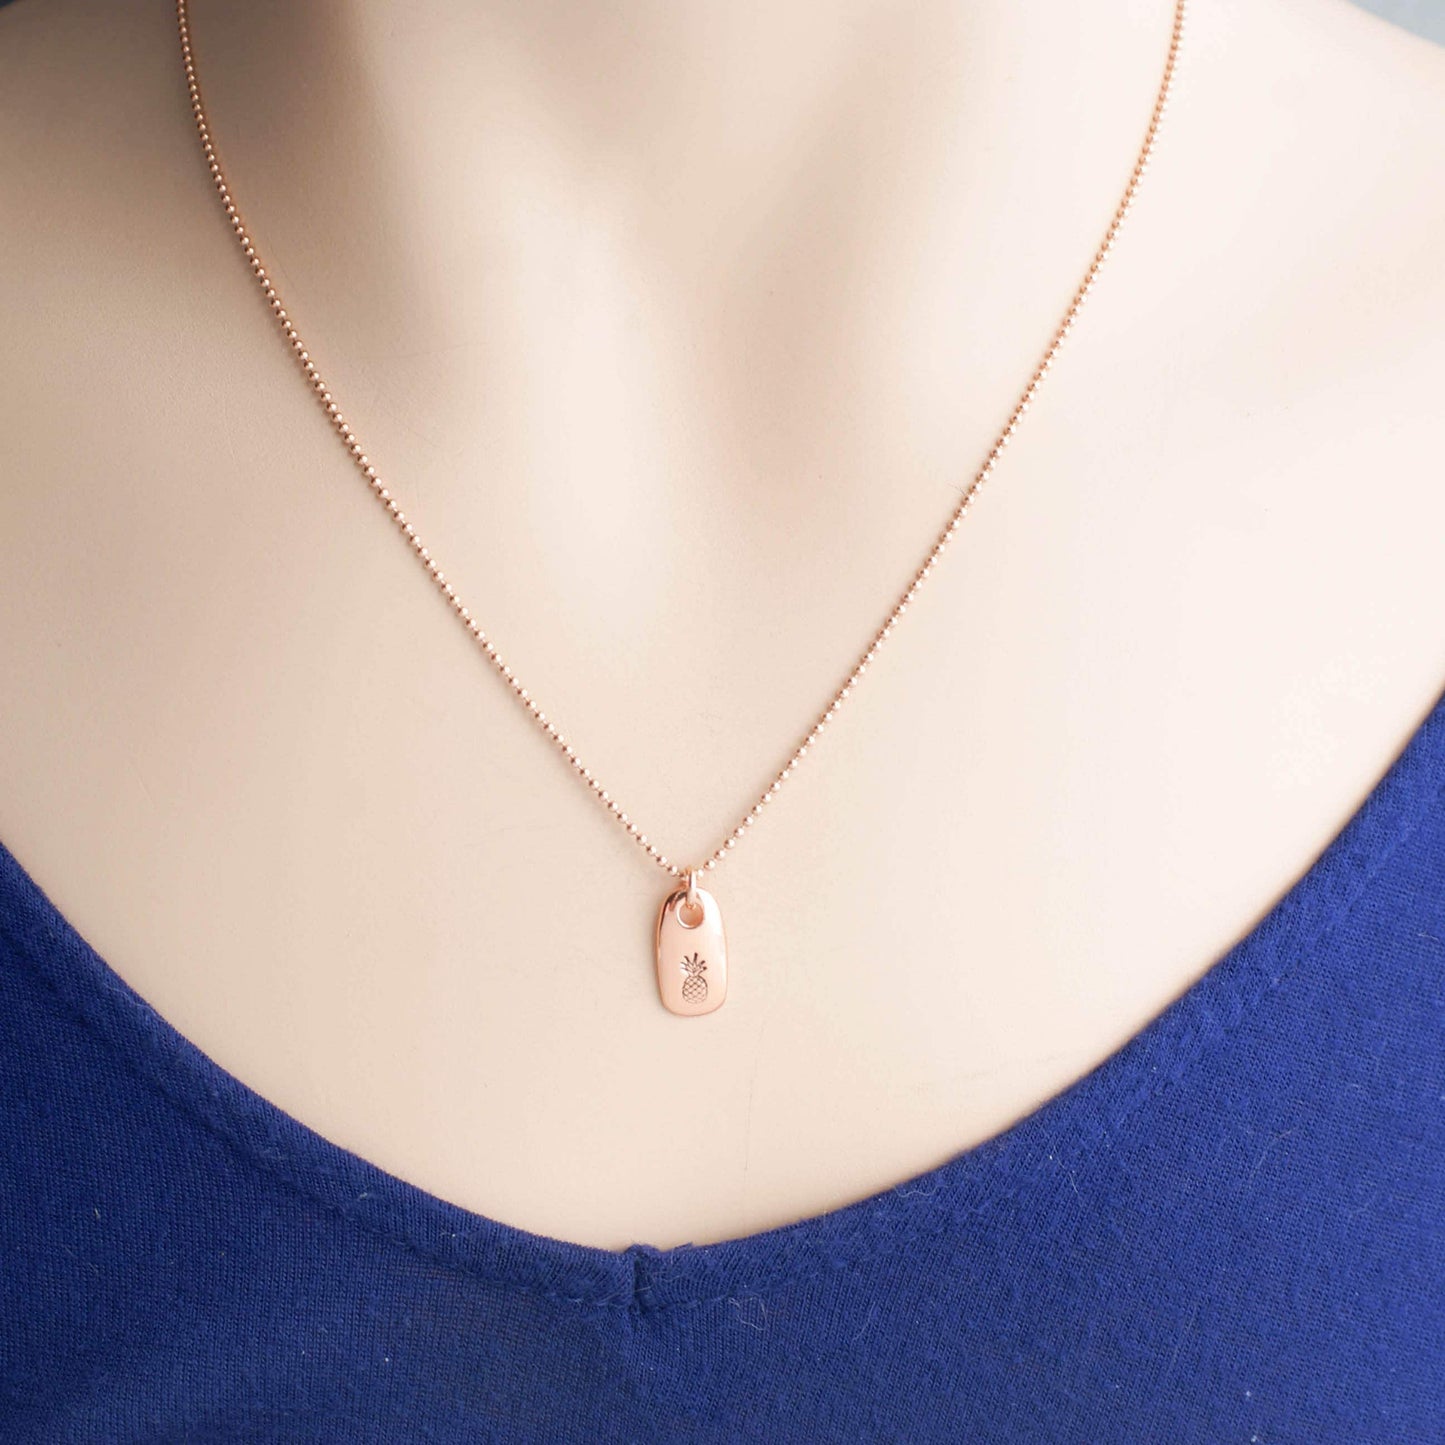 Dainty rose gold pineapple necklace on neck